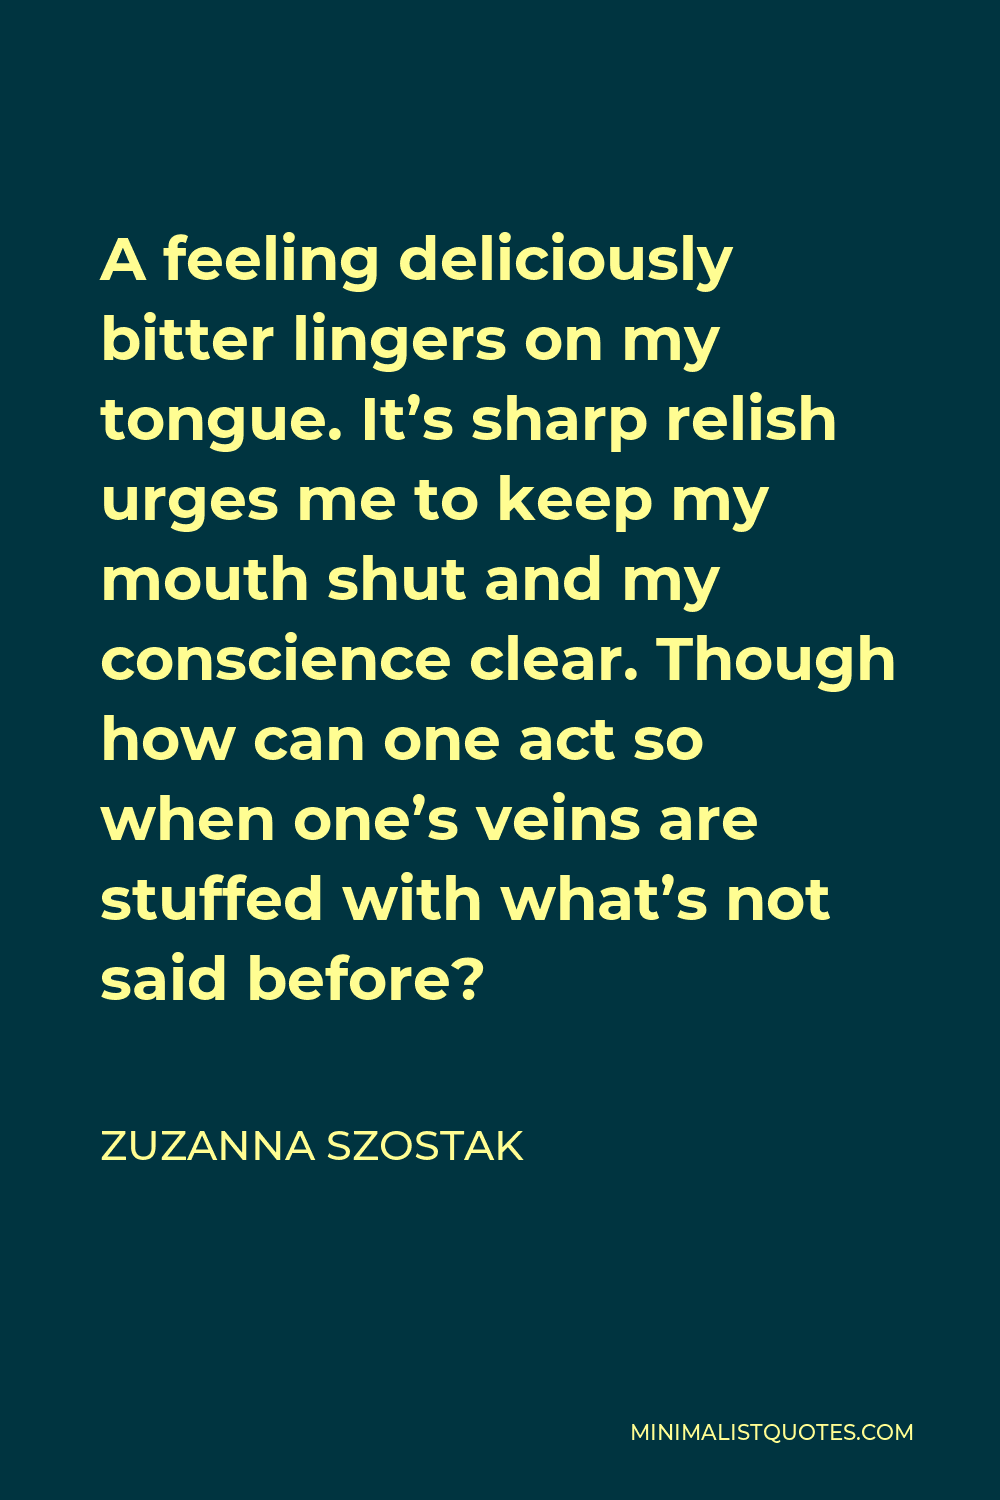 Zuzanna Szostak Quote - A feeling deliciously bitter lingers on my tongue. It’s sharp relish urges me to keep my mouth shut and my conscience clear. Though how can one act so when one’s veins are stuffed with what’s not said before?